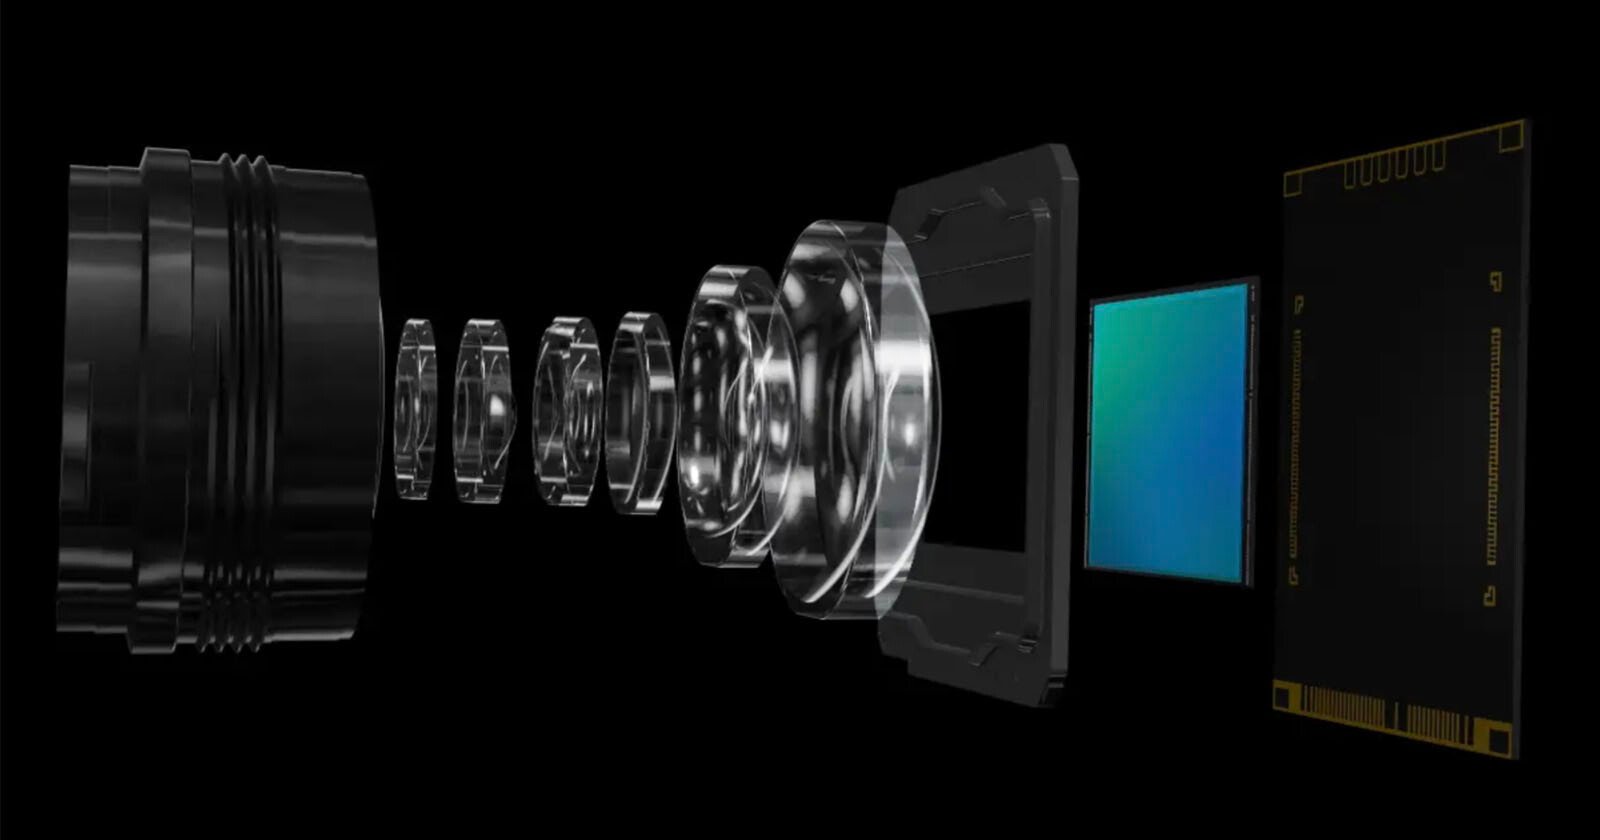 Sony Says Its New Sensor Has Way Better Dynamic Range With Less Noise